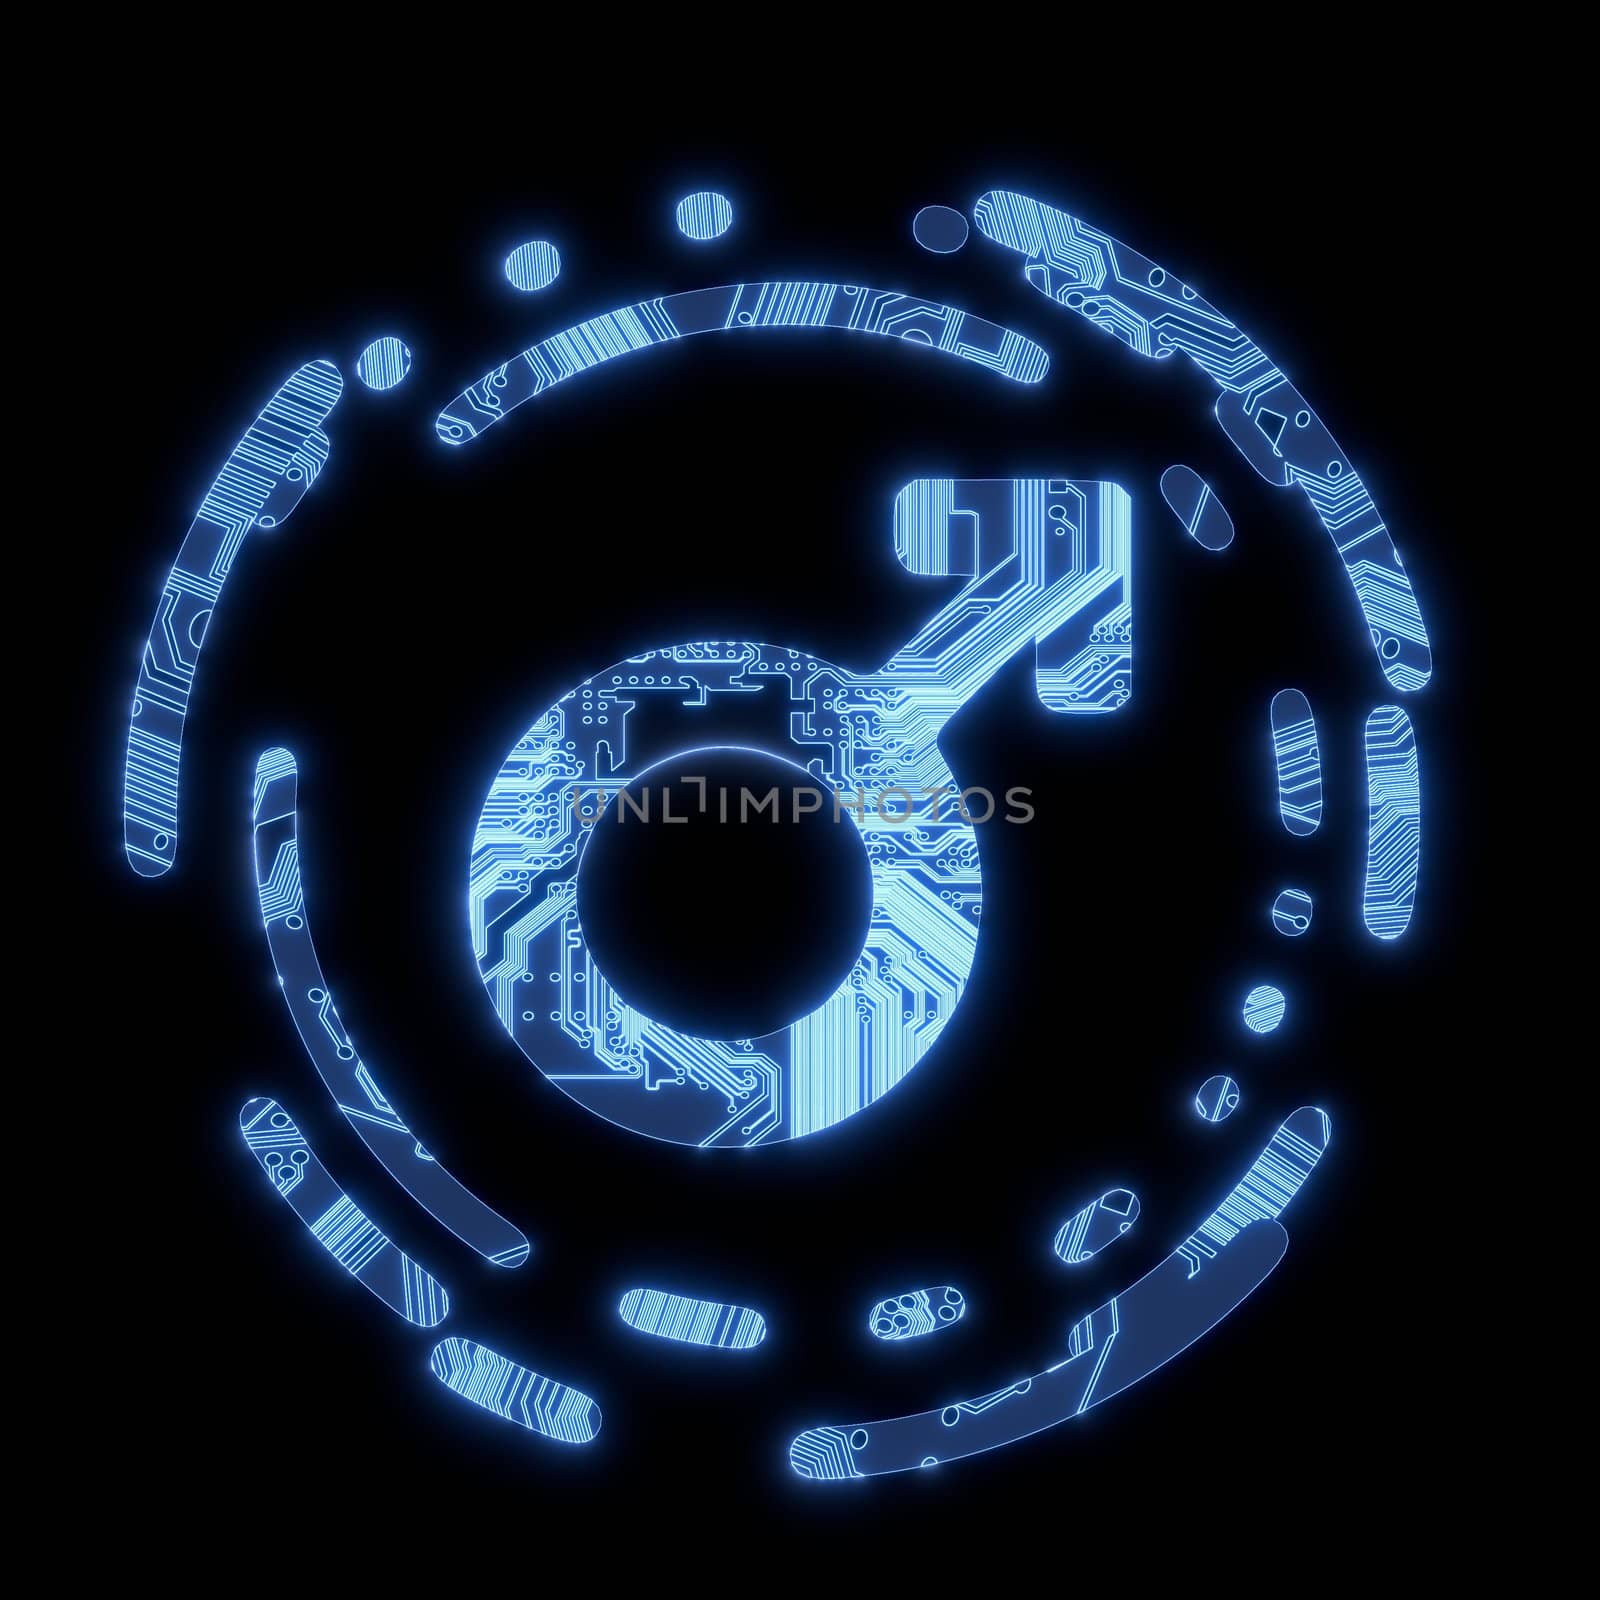 3D Graphic Steel blue  electronic man symbol in a dark background on a computer chip